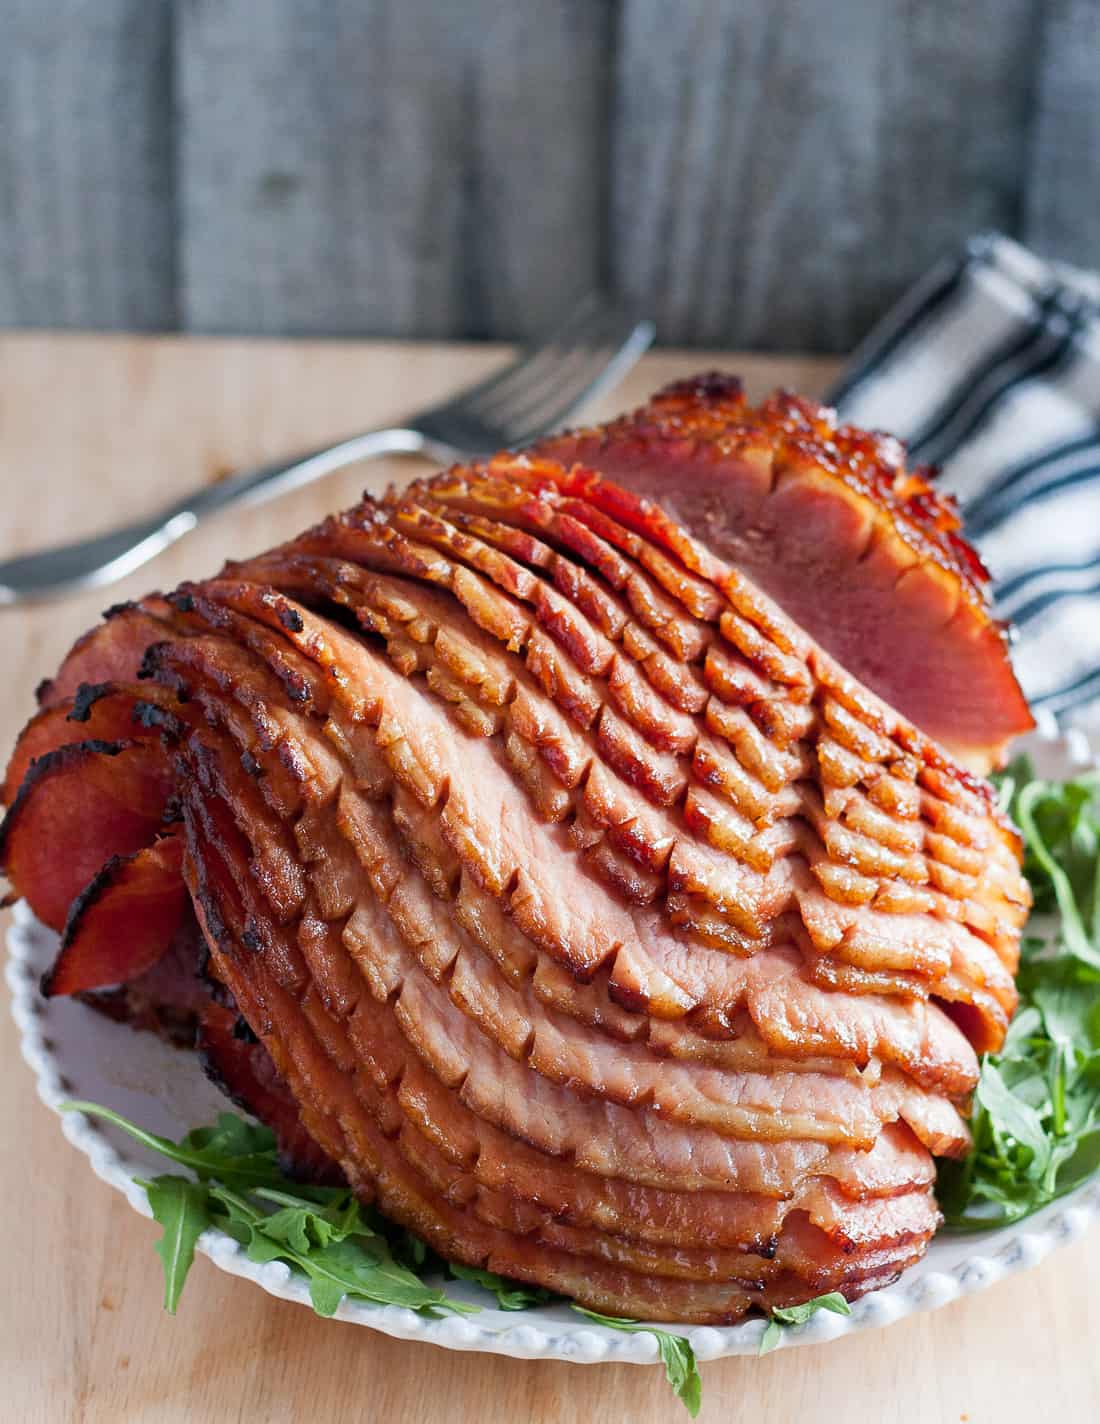 ﻿Make your baked ham extra special with a homemade glaze. It takes just 5 minutes to make the glaze for this bourbon honey glazed ham! * Recipe on GoodieGodmother.com